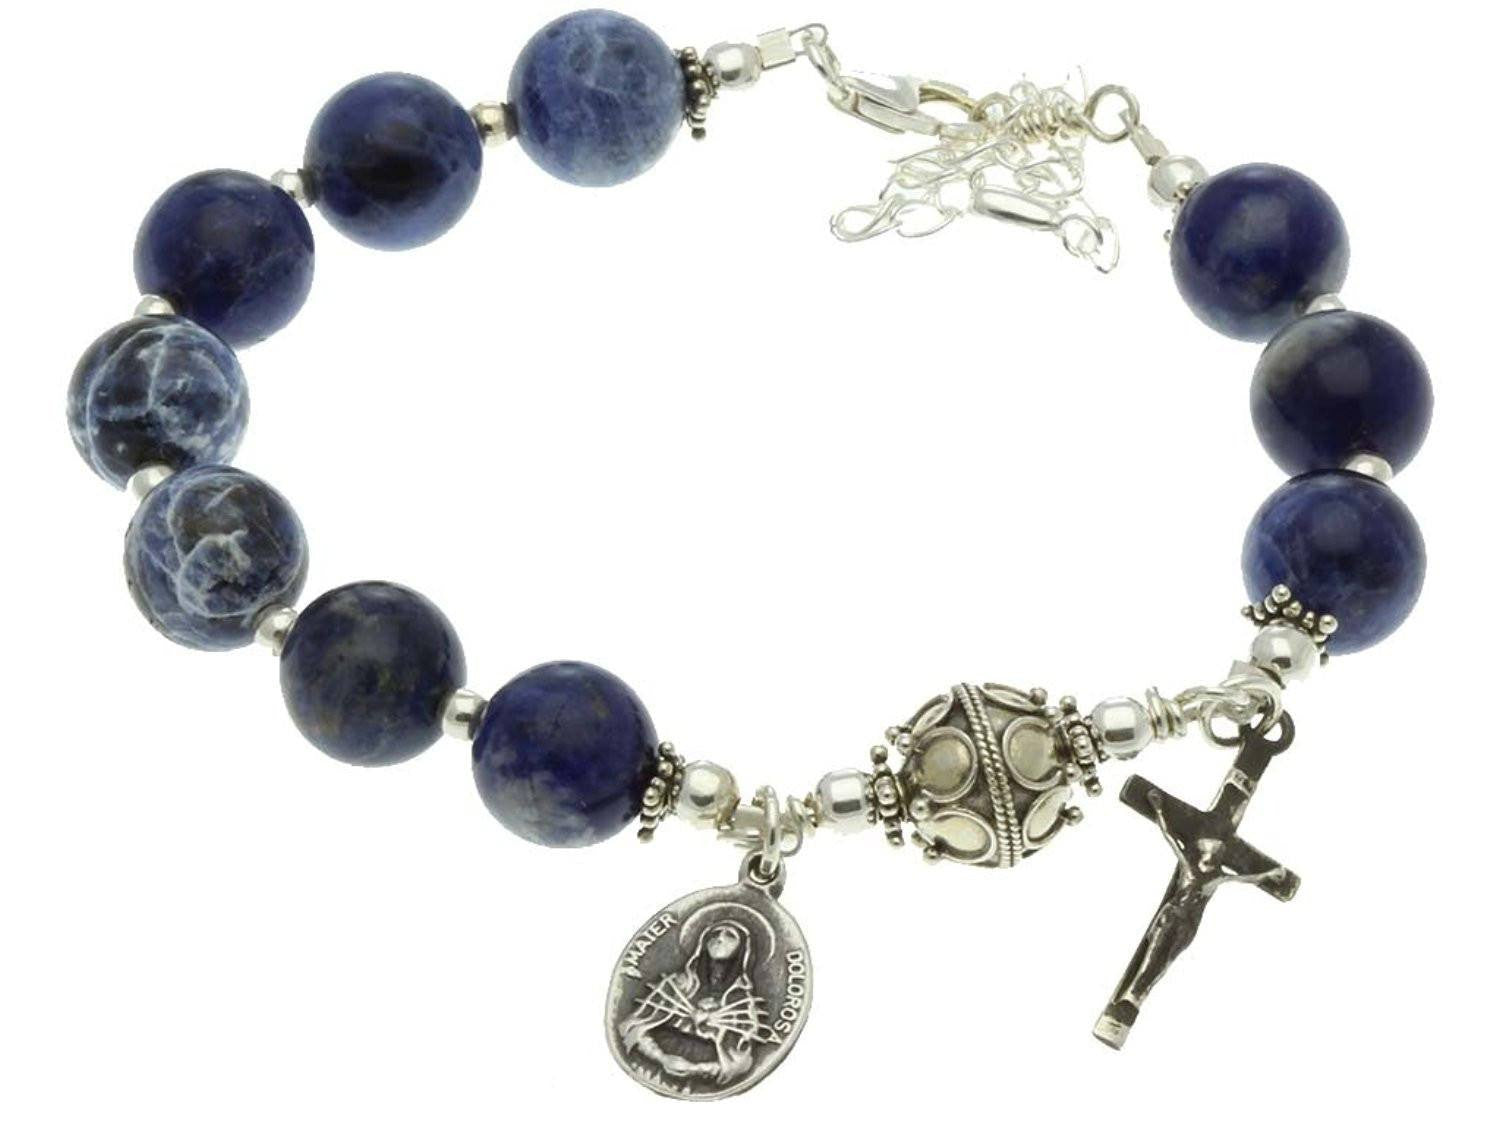 Sterling Silver 7 Sorrows Rosary Bracelet Sodalite Crucifix Our Lady of sorrows